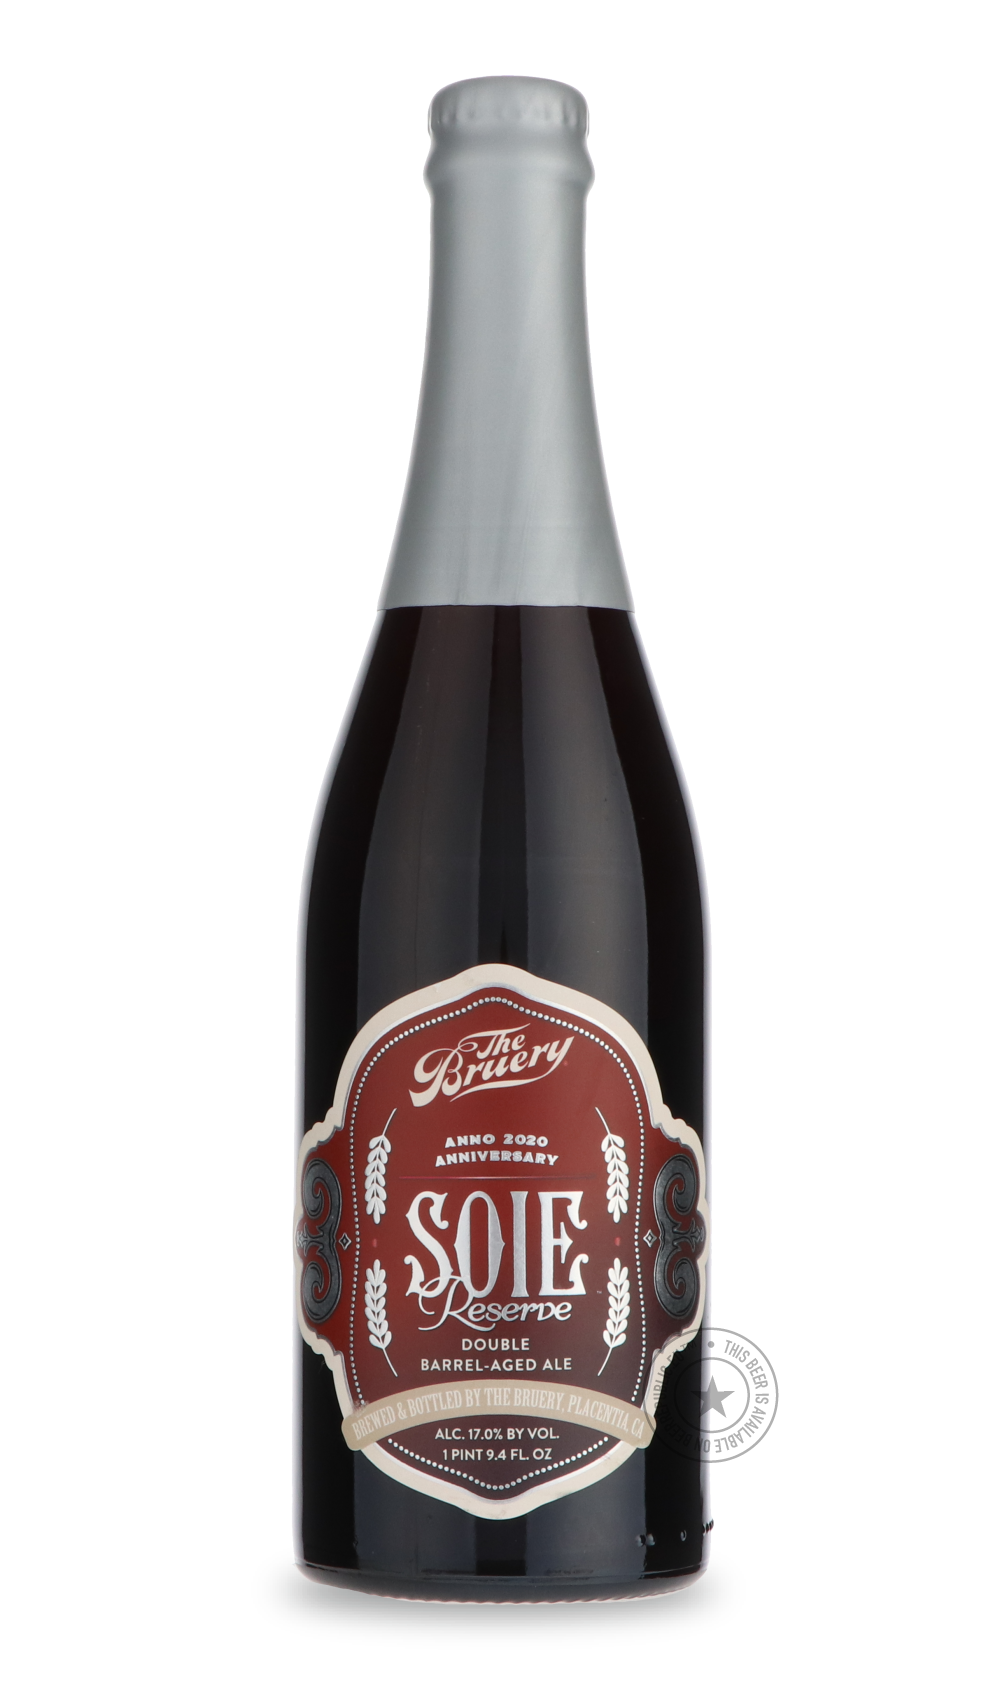 -The Bruery- Soie Reserve-Brown & Dark- Only @ Beer Republic - The best online beer store for American & Canadian craft beer - Buy beer online from the USA and Canada - Bier online kopen - Amerikaans bier kopen - Craft beer store - Craft beer kopen - Amerikanisch bier kaufen - Bier online kaufen - Acheter biere online - IPA - Stout - Porter - New England IPA - Hazy IPA - Imperial Stout - Barrel Aged - Barrel Aged Imperial Stout - Brown - Dark beer - Blond - Blonde - Pilsner - Lager - Wheat - Weizen - Amber 